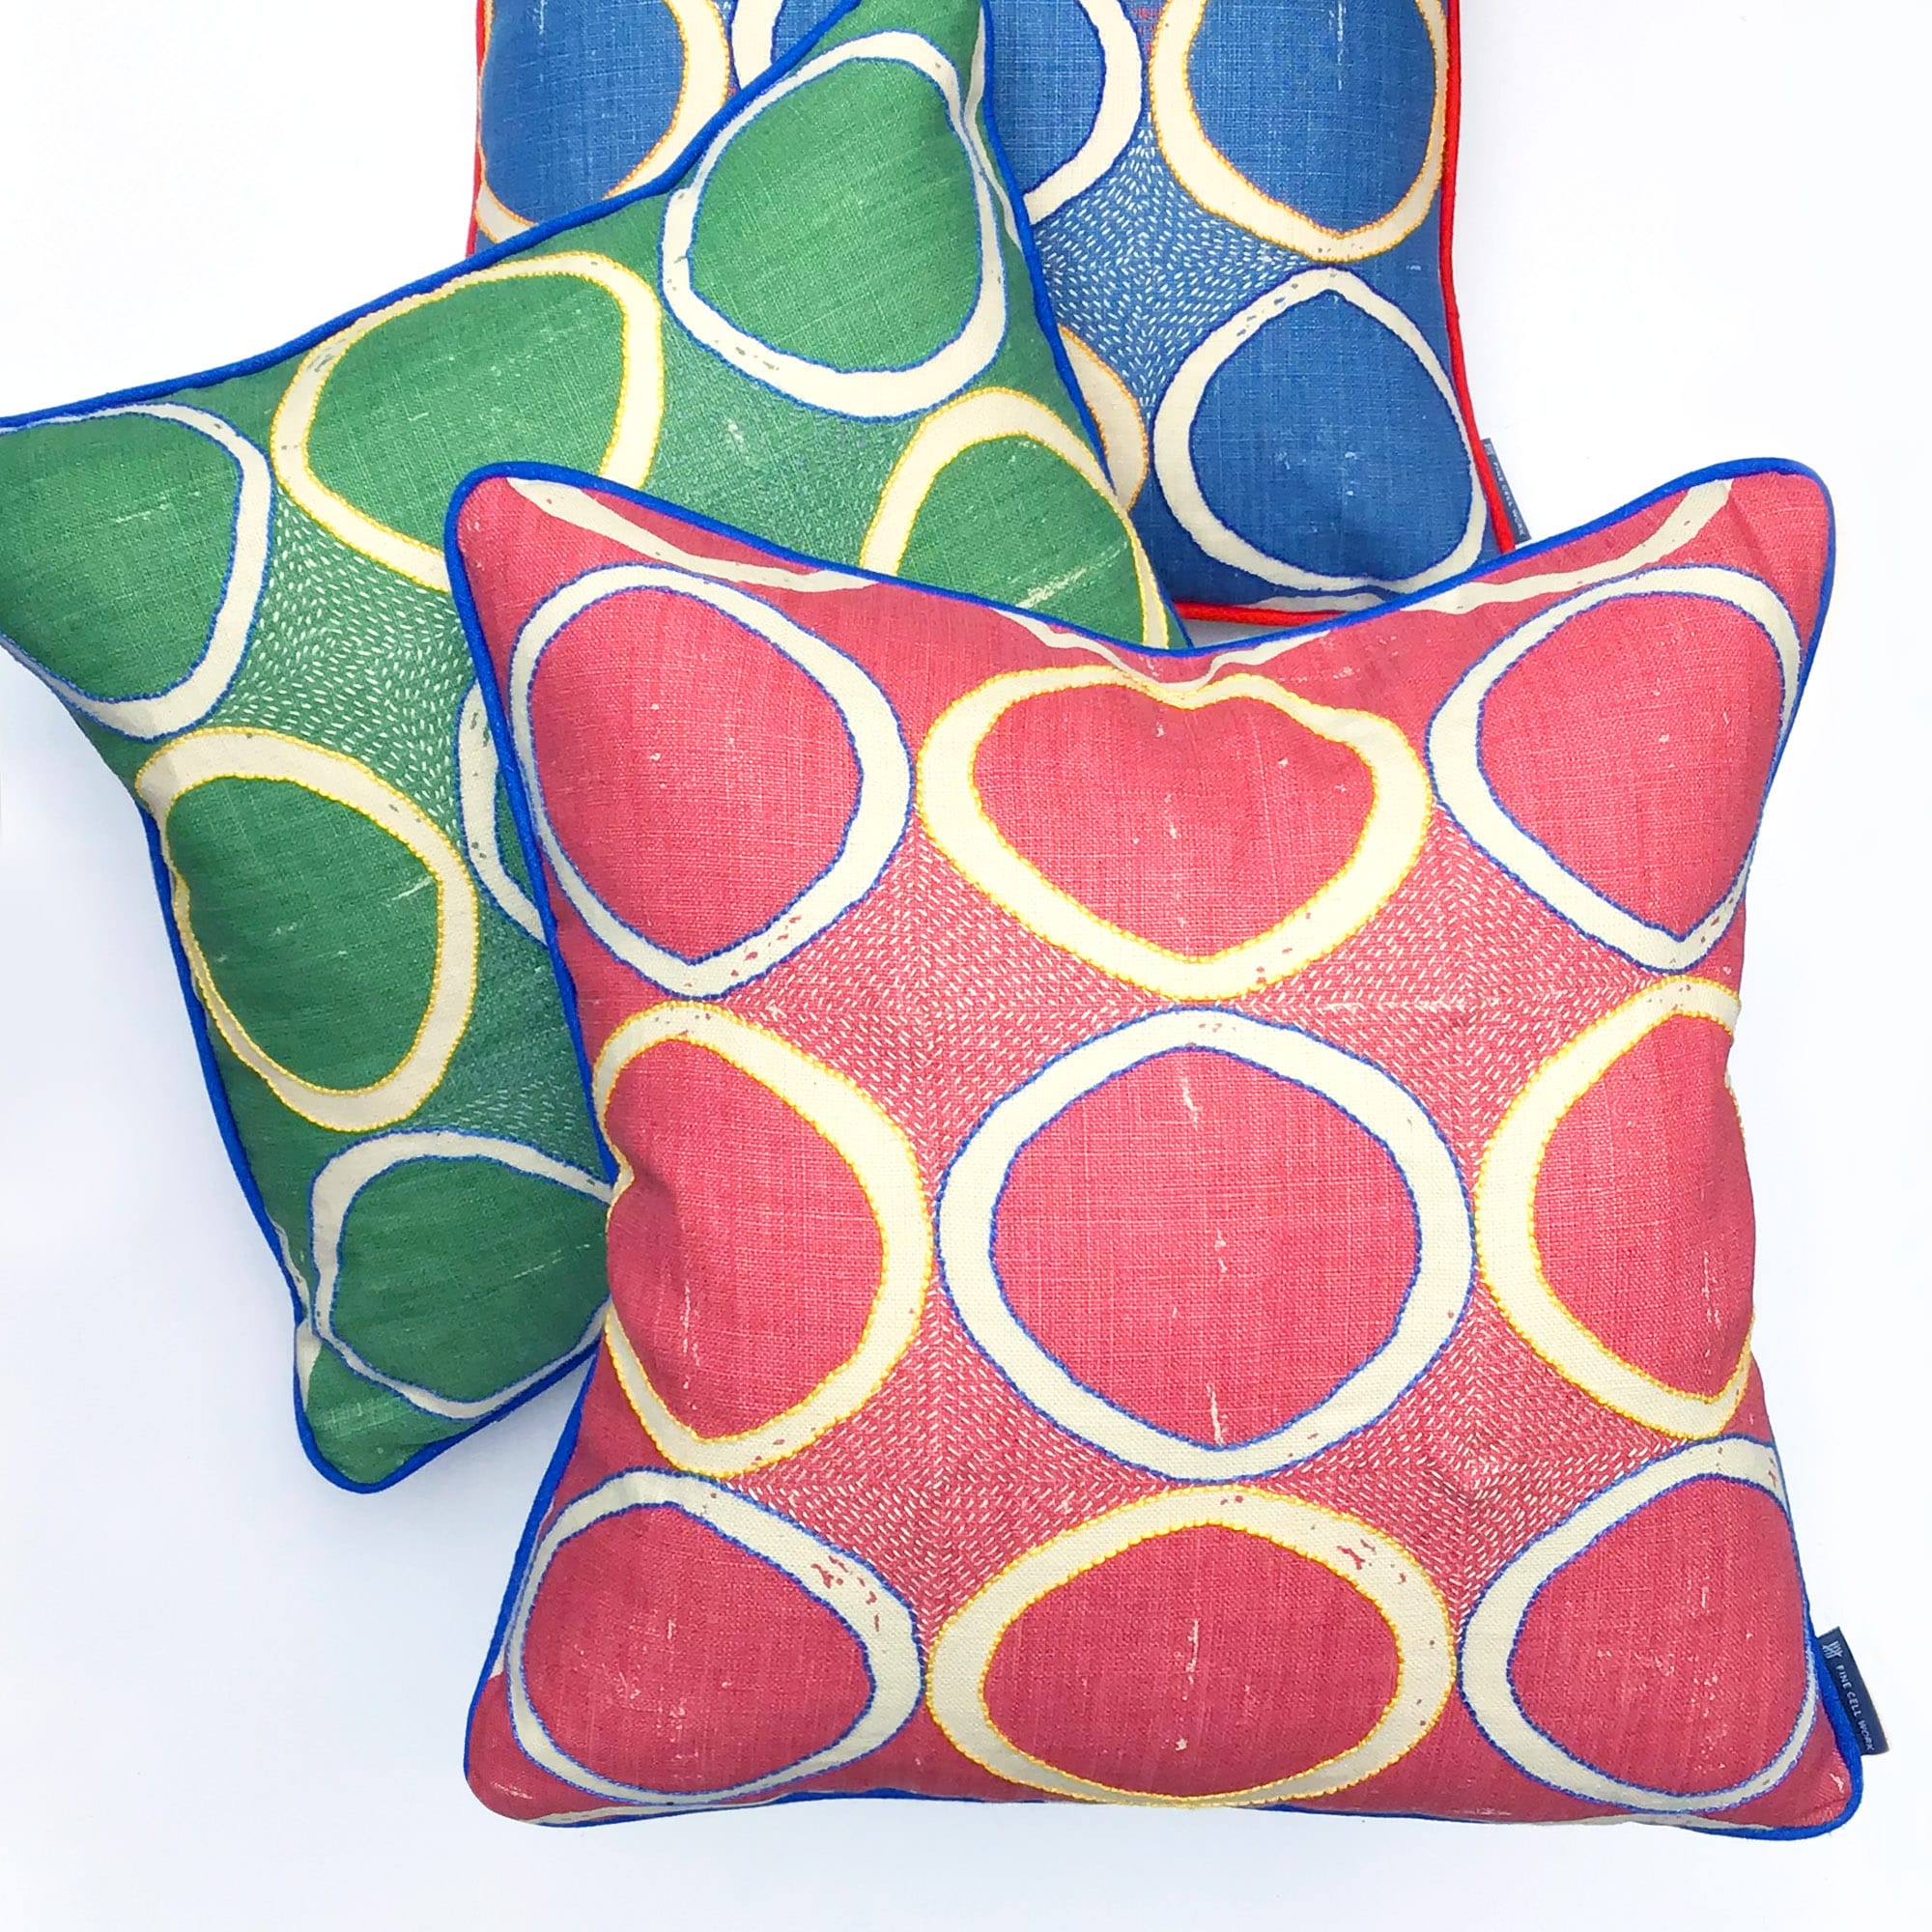 Hand-Embroidered Blithfield Circles Cushion Blue